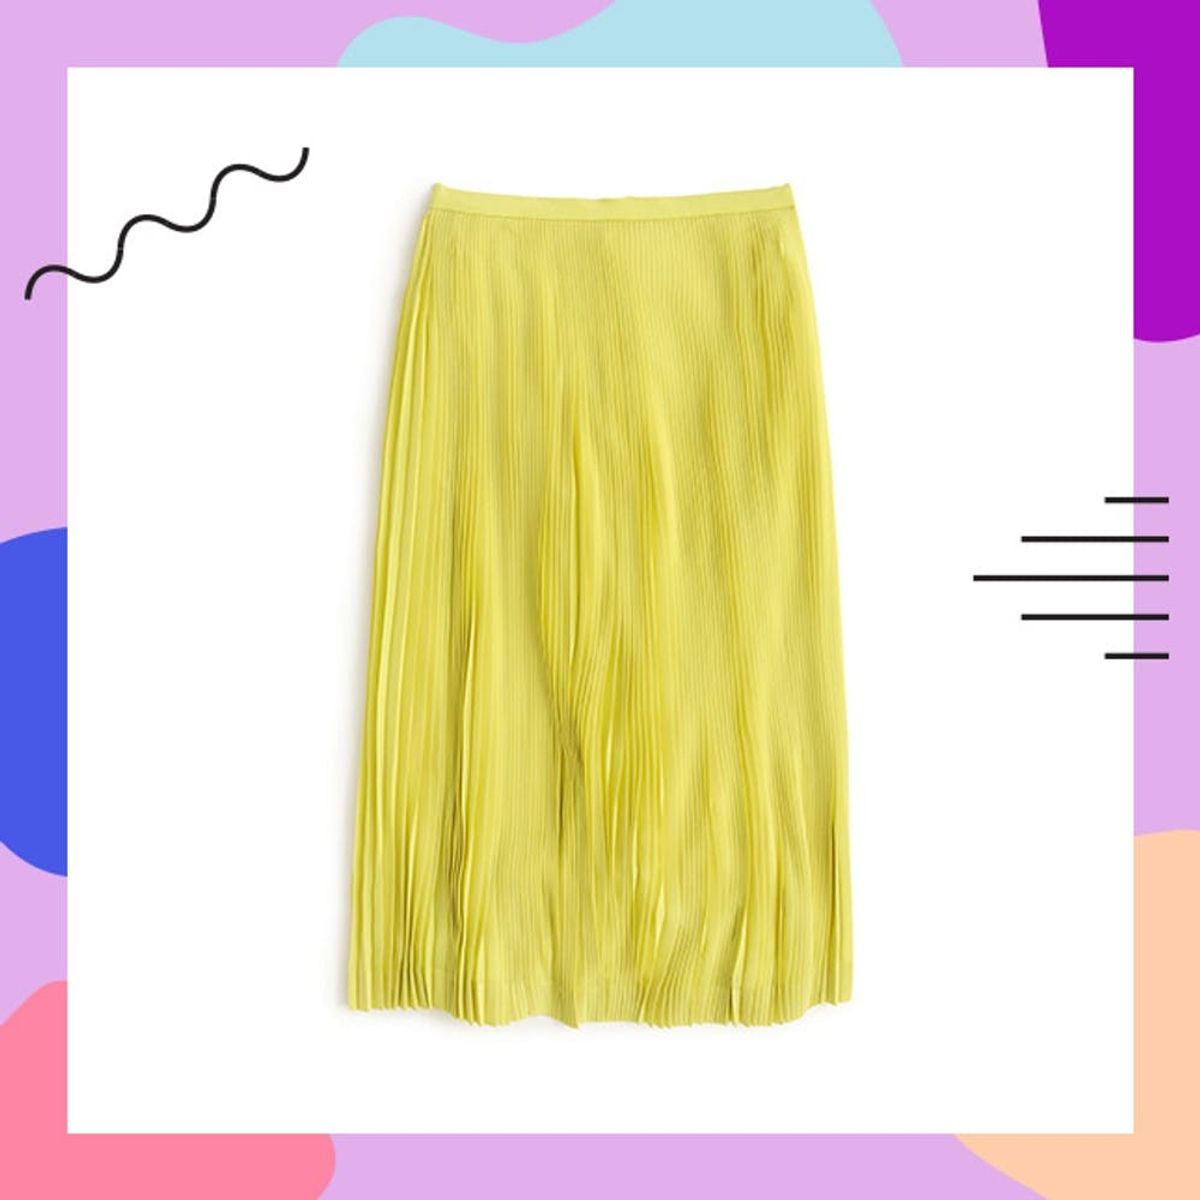 3 Outfits That Prove a Midi Skirt Is Perfect for Spring